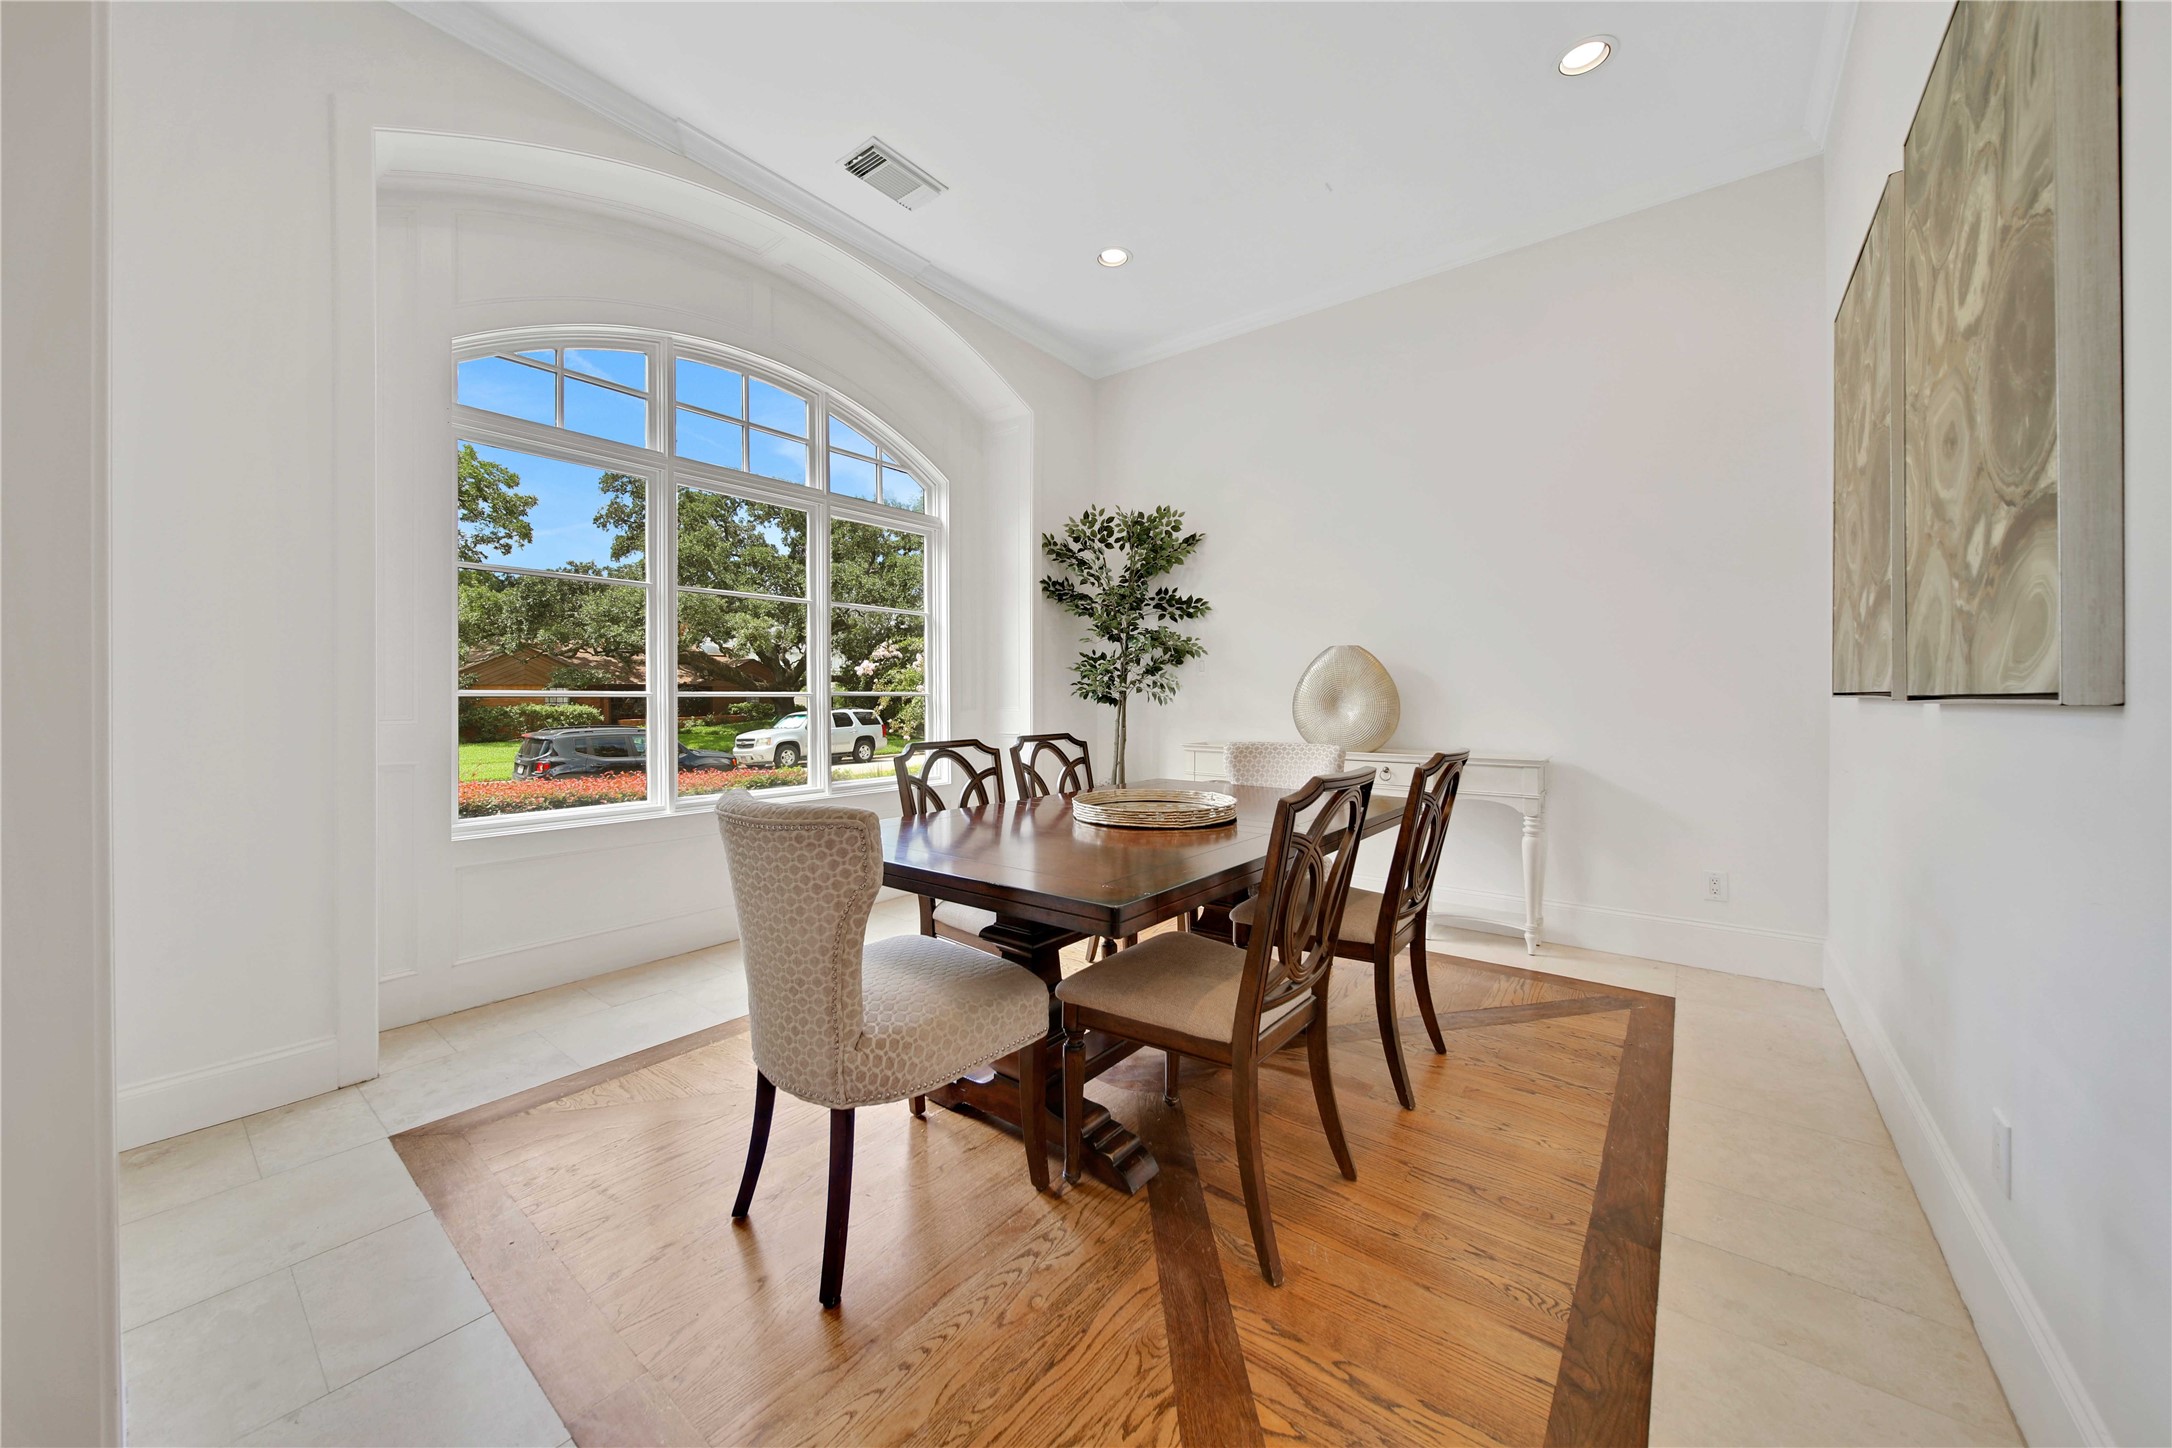 Step into luxury and elegance with the formal dining room and living room of this remarkable home.